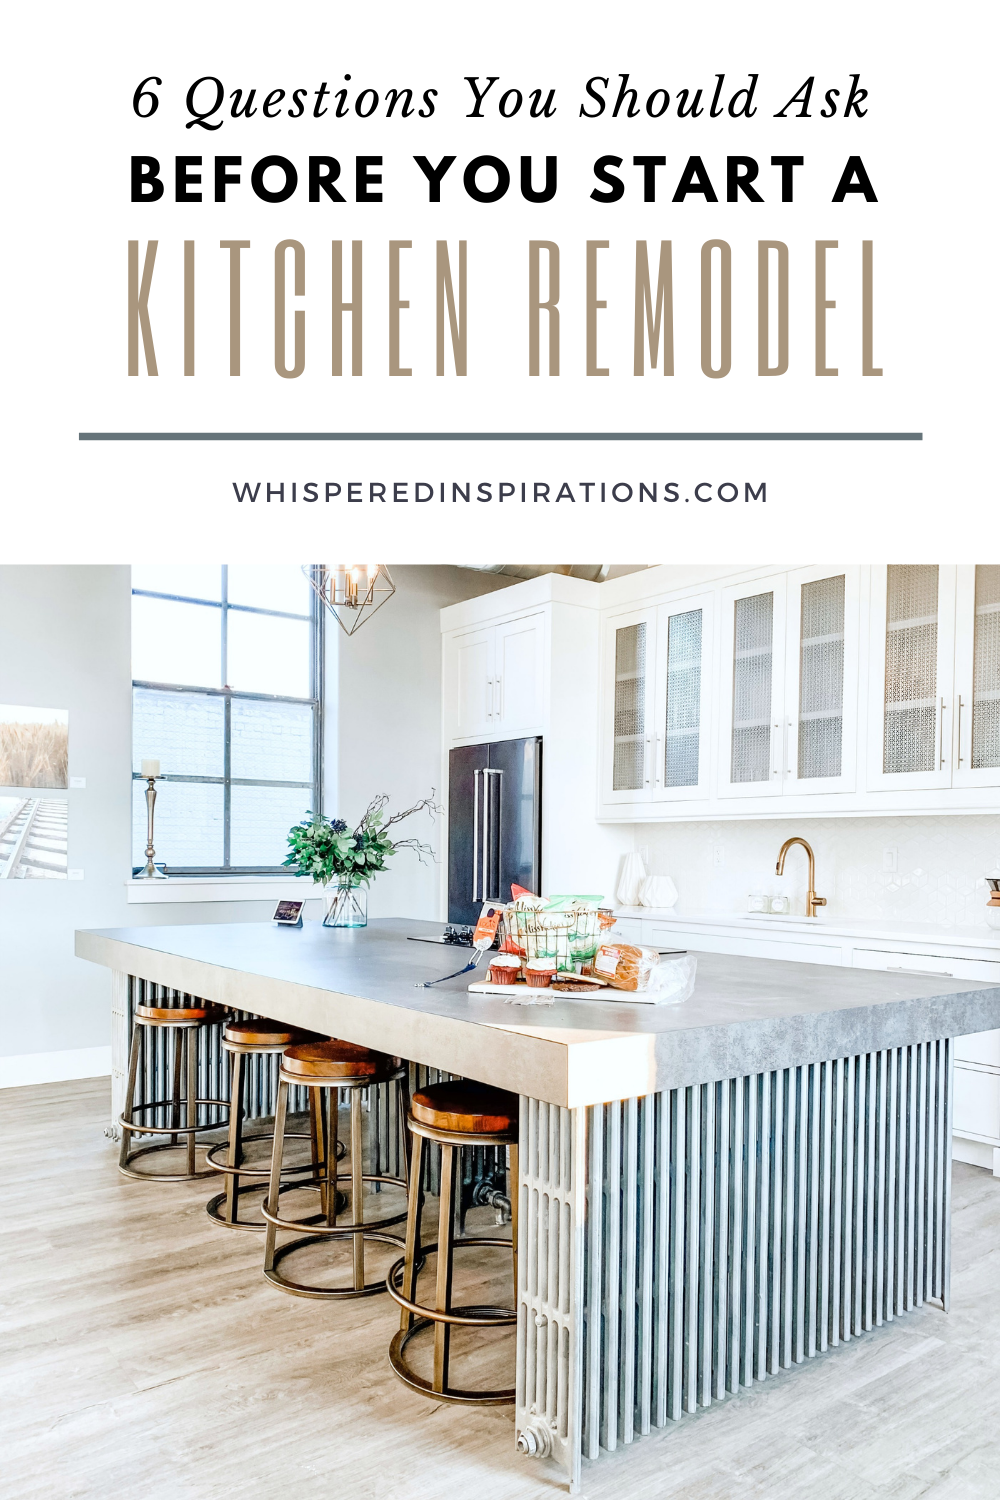 A recently remodelled kitchen that is industrial and modern. A banner reads, "6 Questions You Should Ask Before Starting a Kitchen Remodel."